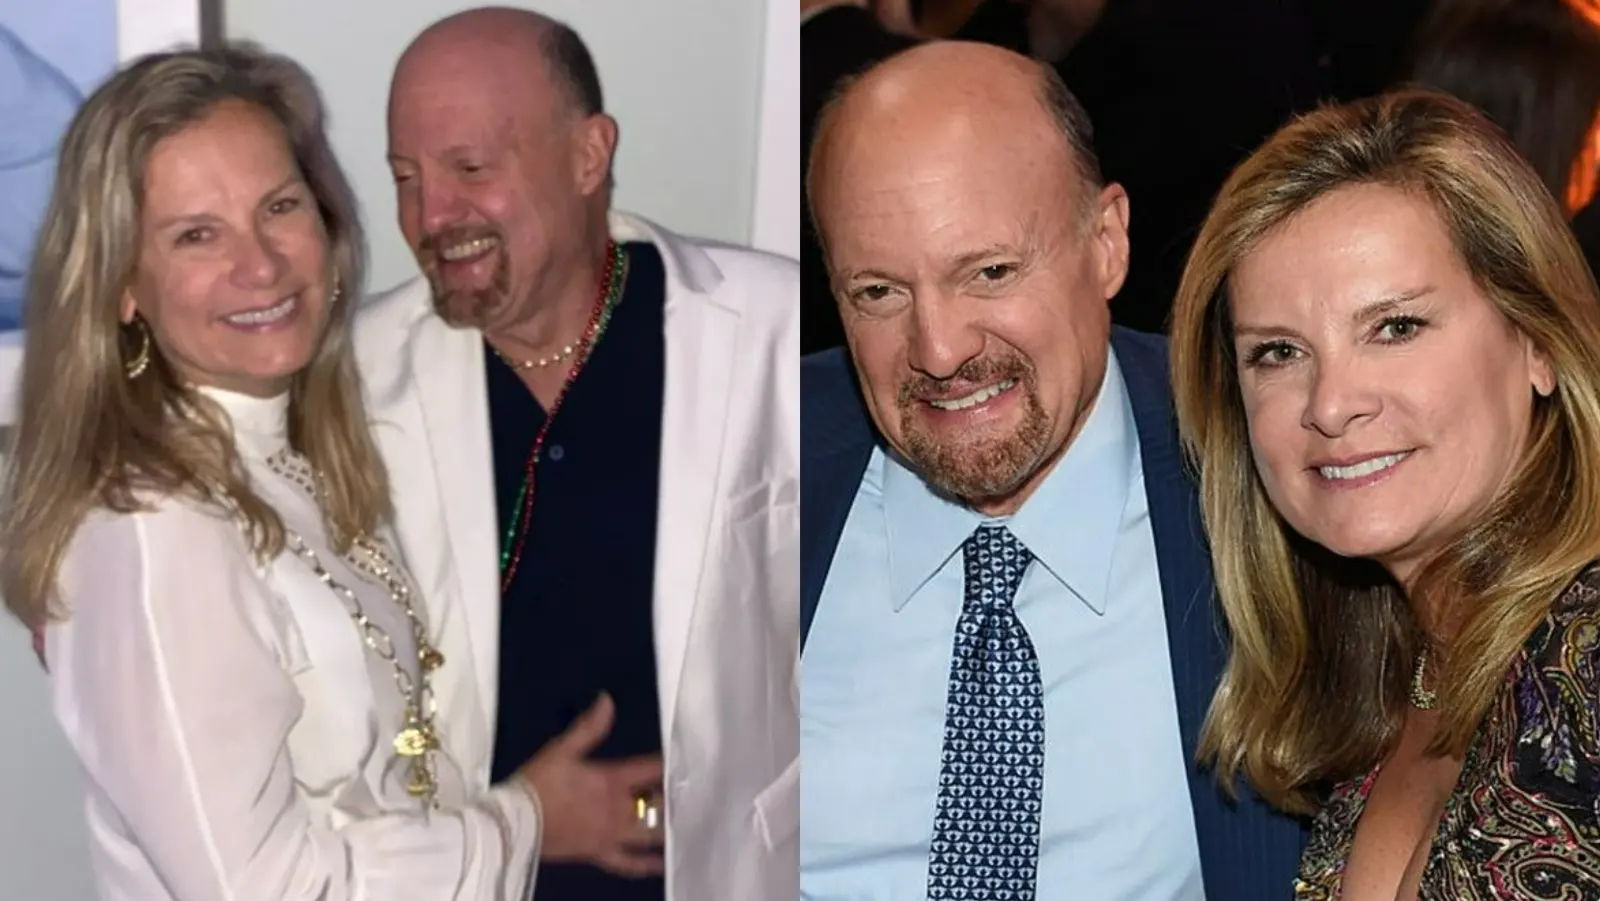 Jim Cramer present wife Lisa Cadette Detwiler's Age, Height, Wiki, Daughter, Instagram, Love Story and net worth